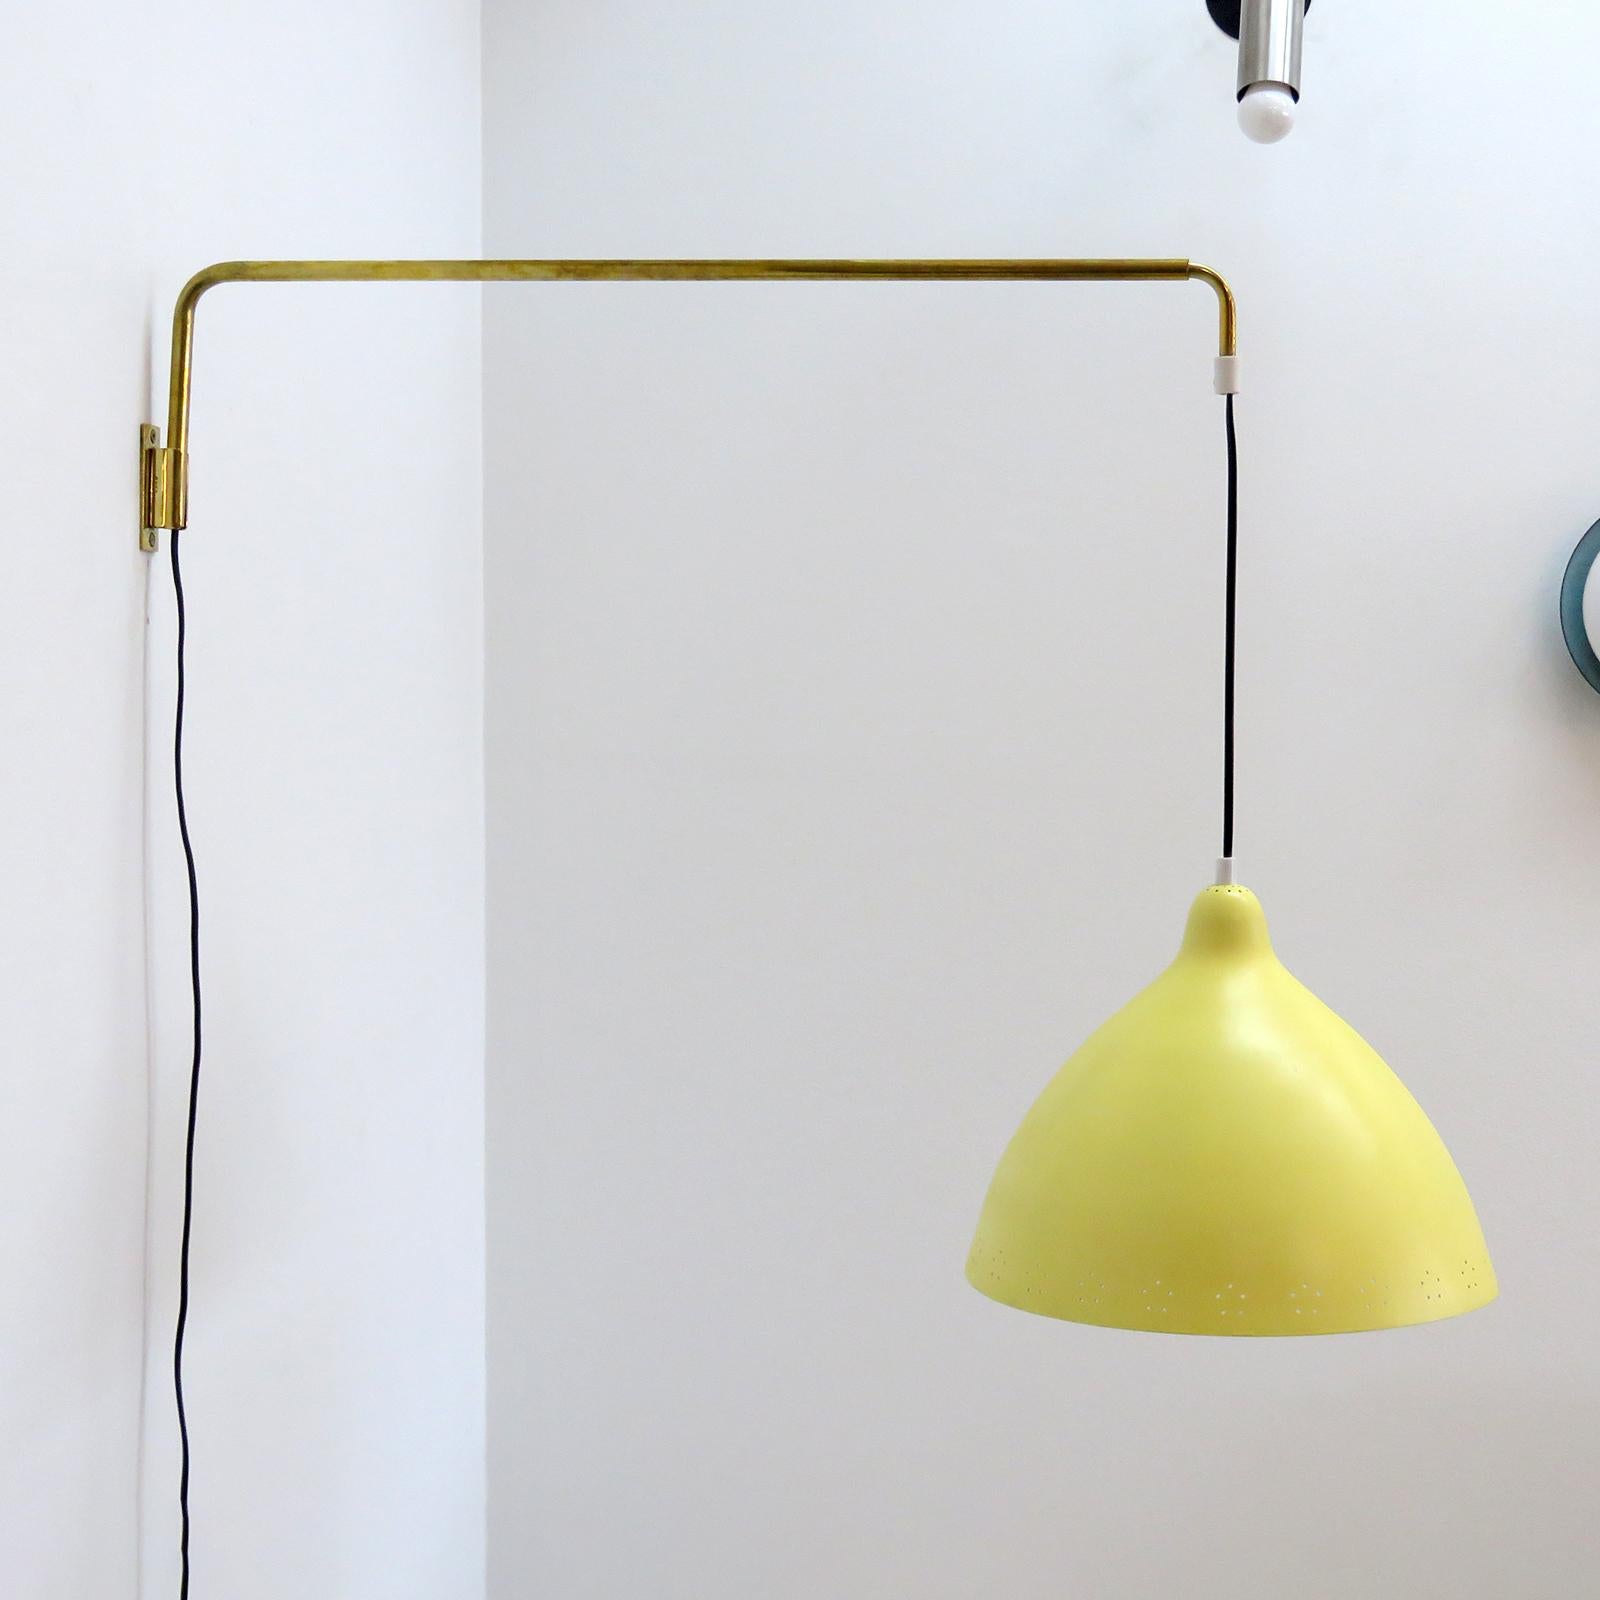 Scandinavian Modern Swing Arm Wall Lights by Lisa Johansson-Pape for Orno, 1960 For Sale